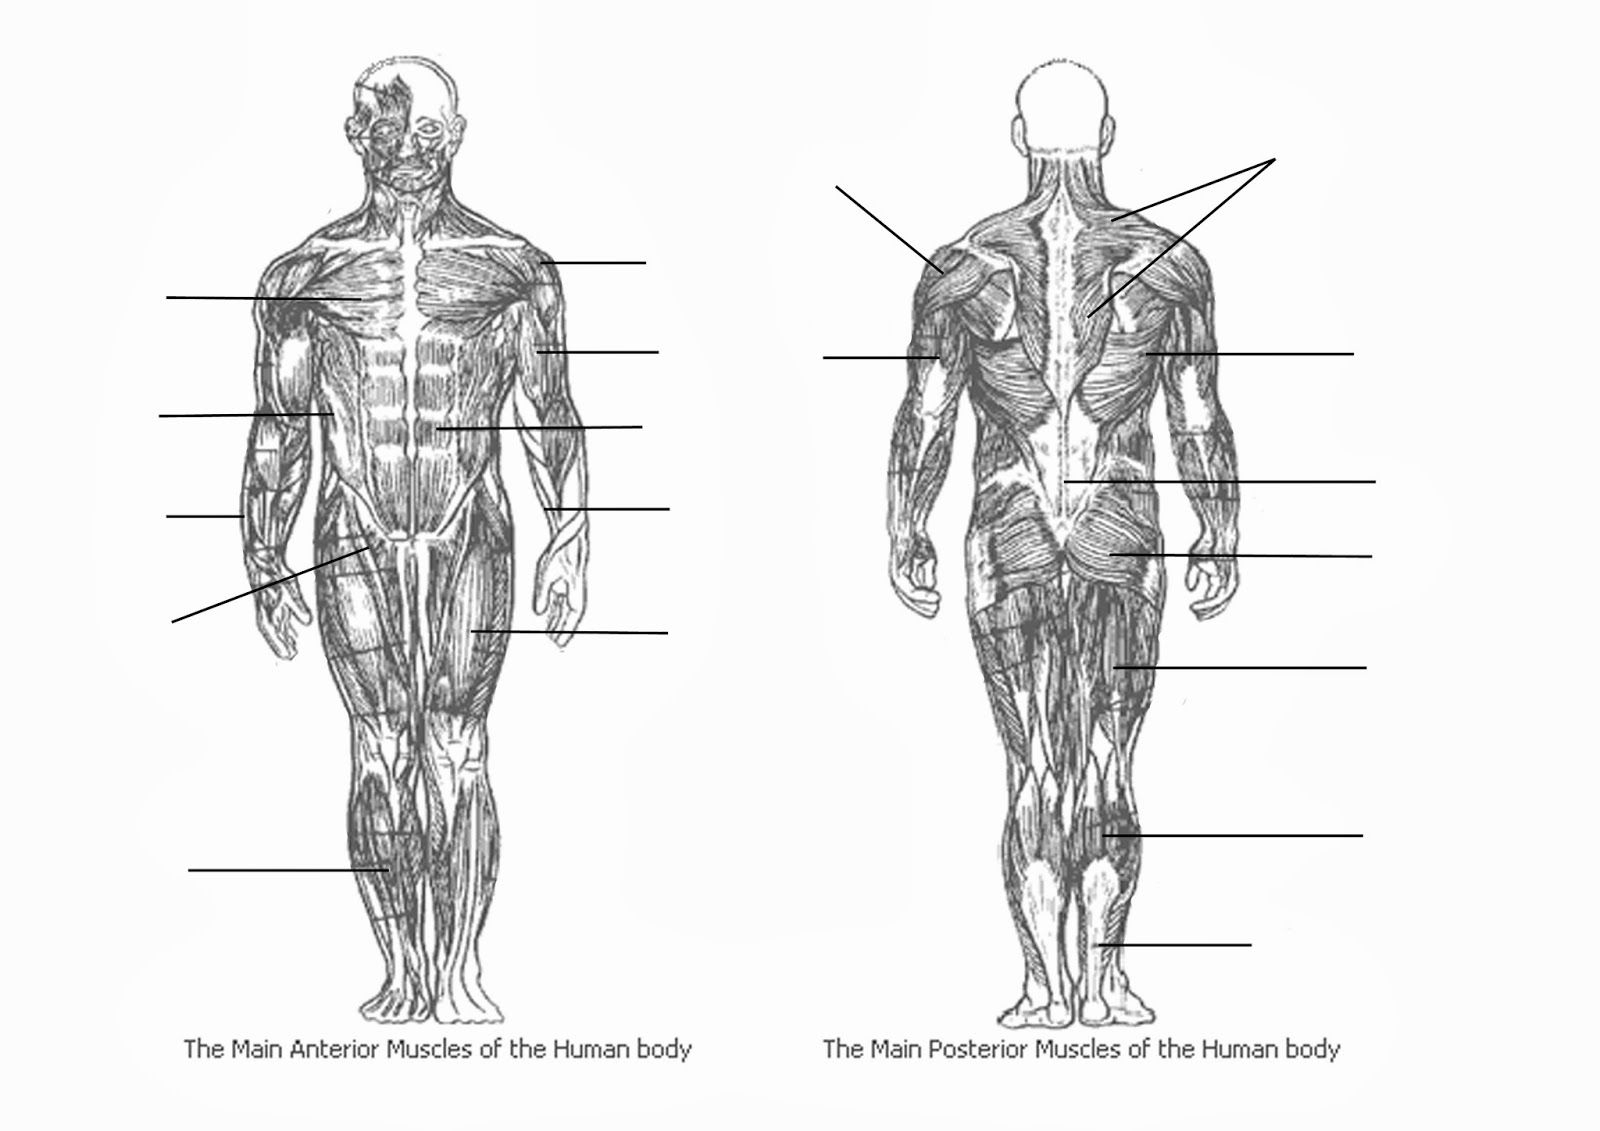 Muscle Diagram Blank Koibana info Muscle Diagram Muscular System